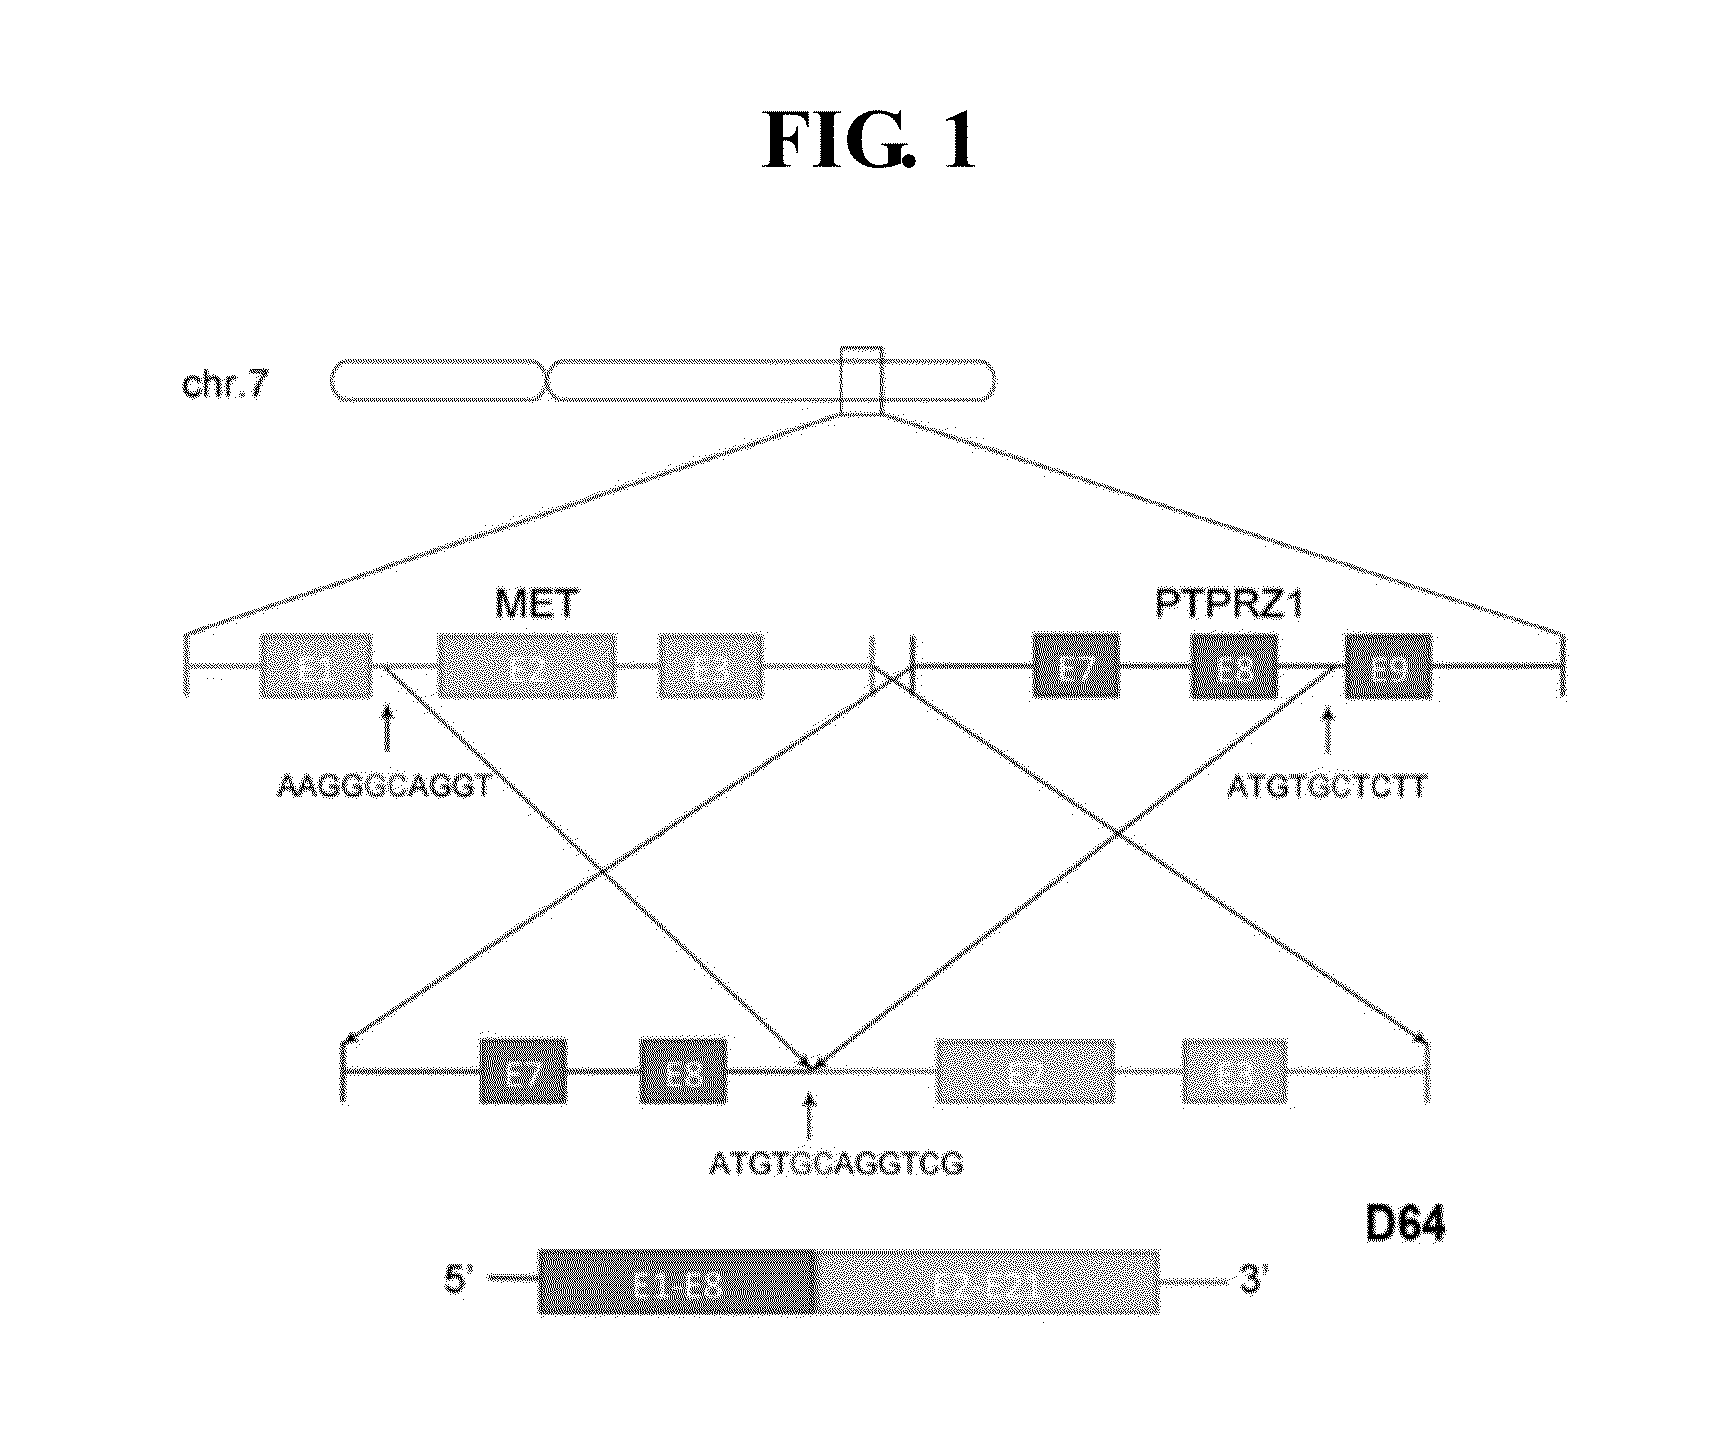 Artificial synthetic cdna and method for detecting secondary glioblastoma